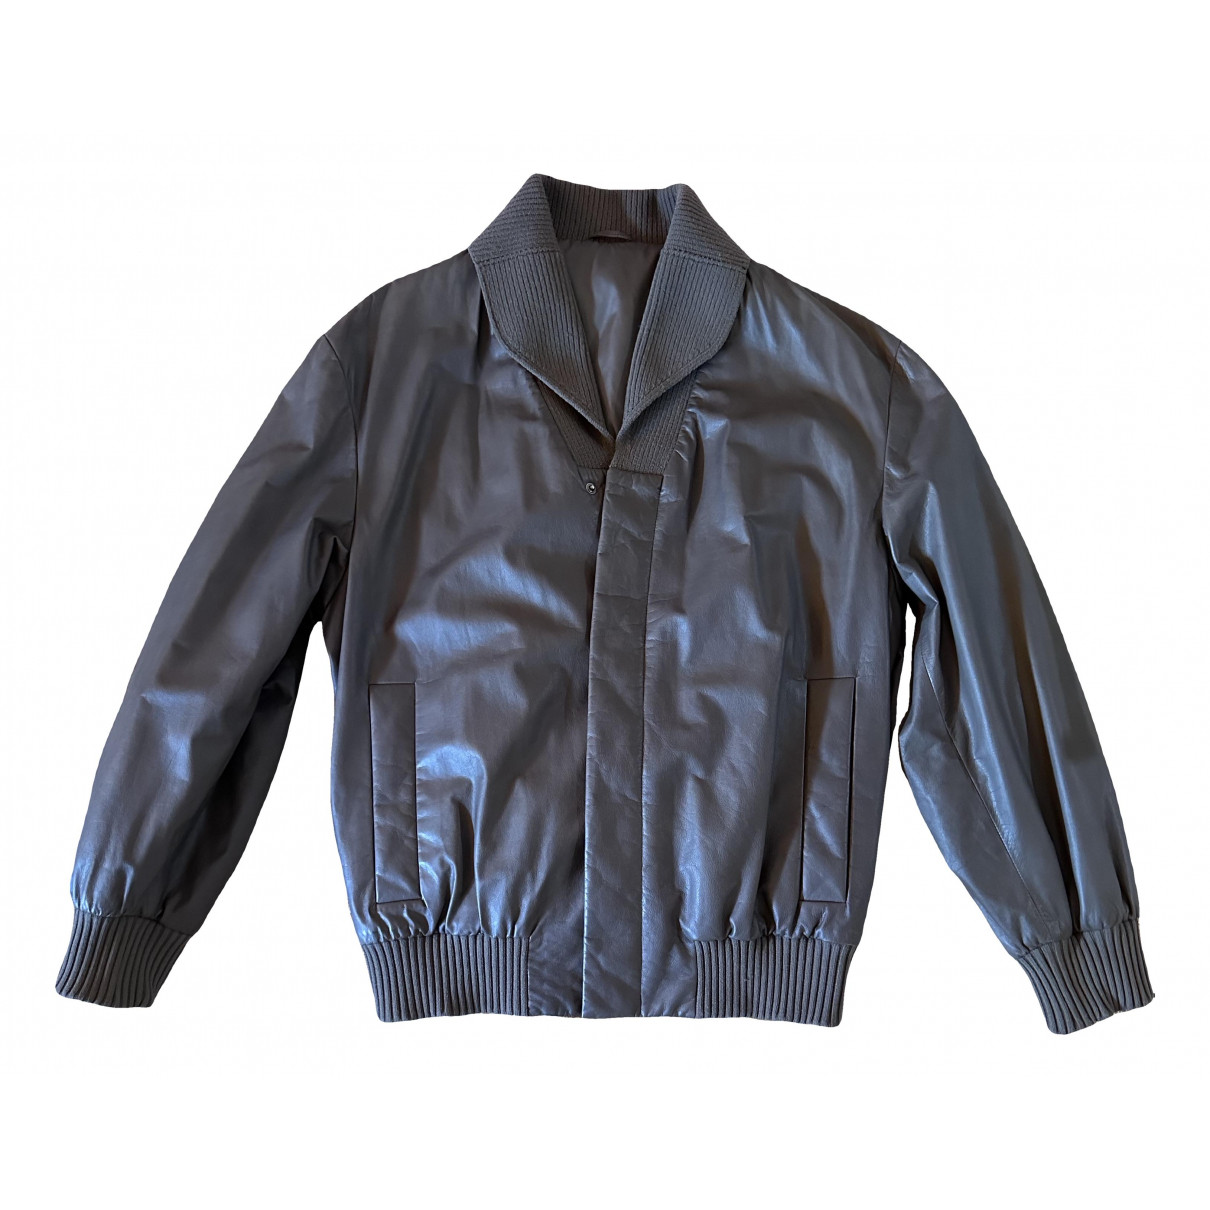 clothing Jil Sander jackets for Male Leather 50 IT. Used condition